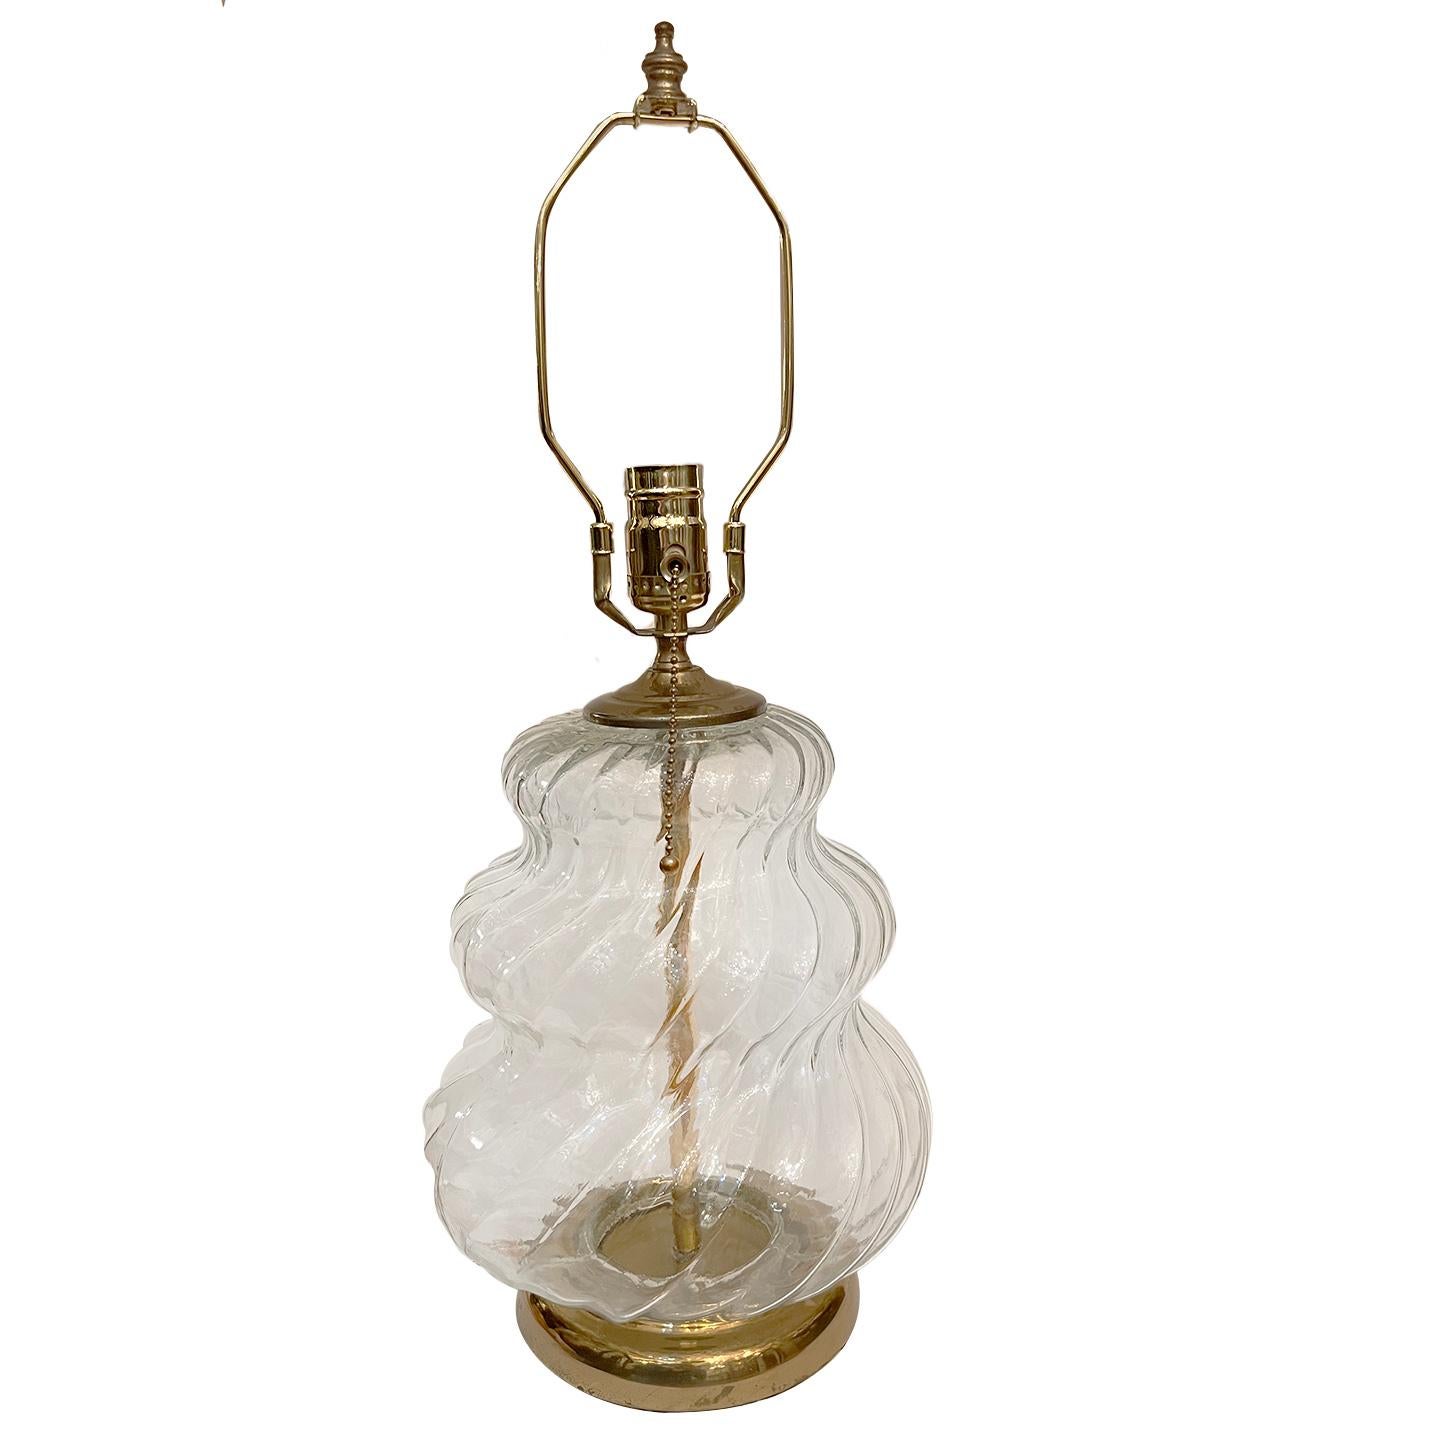 A single circa 1960's Italian molded glass lamp with brass base.

Measurements:
Height of body: 12